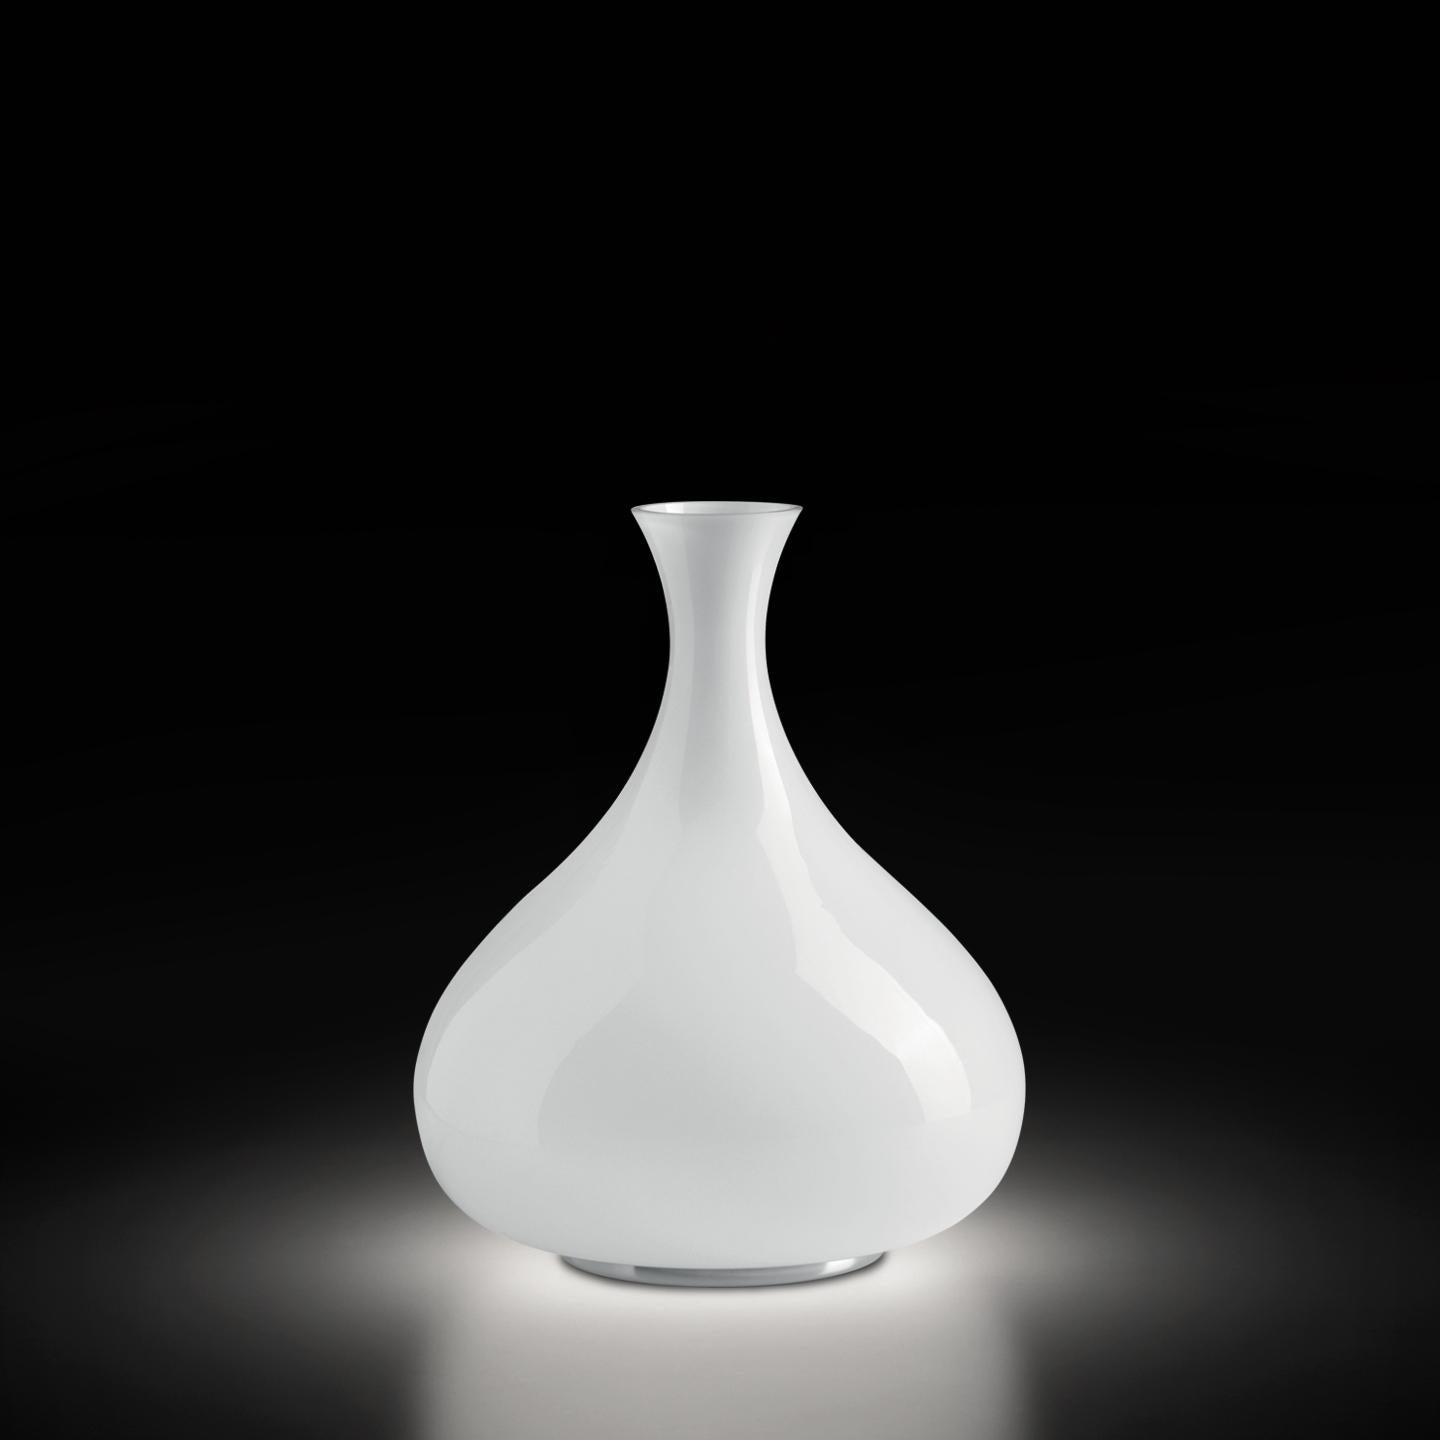 Celebrated ceramic artist Eva Zeisel designed the Spring and Summer collections in 2012 for Leucos. Zeisel took the soft sculptural lines that she developed over her life’s work in ceramics and forged them into large illuminated vessels made with a